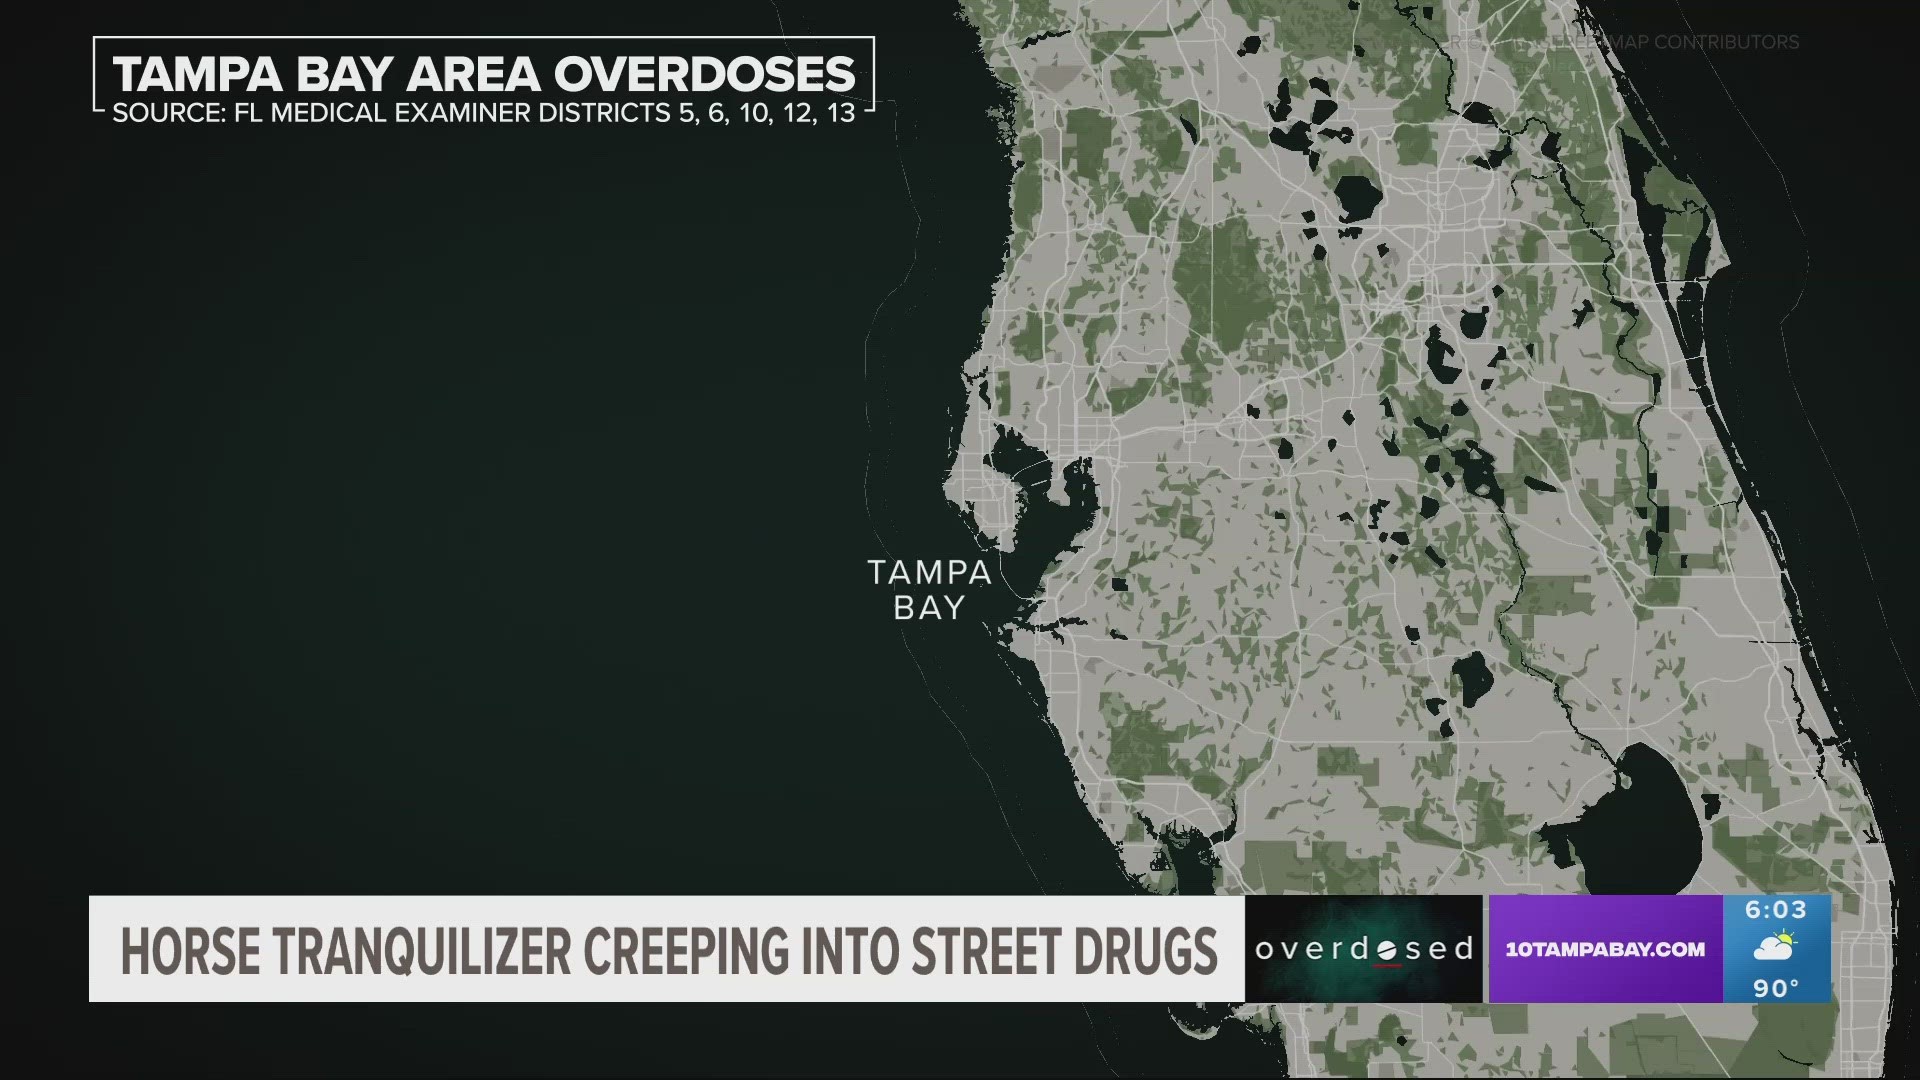 People have been overdosing on a combination of fentanyl and xylazine in the Tampa Bay area for years.